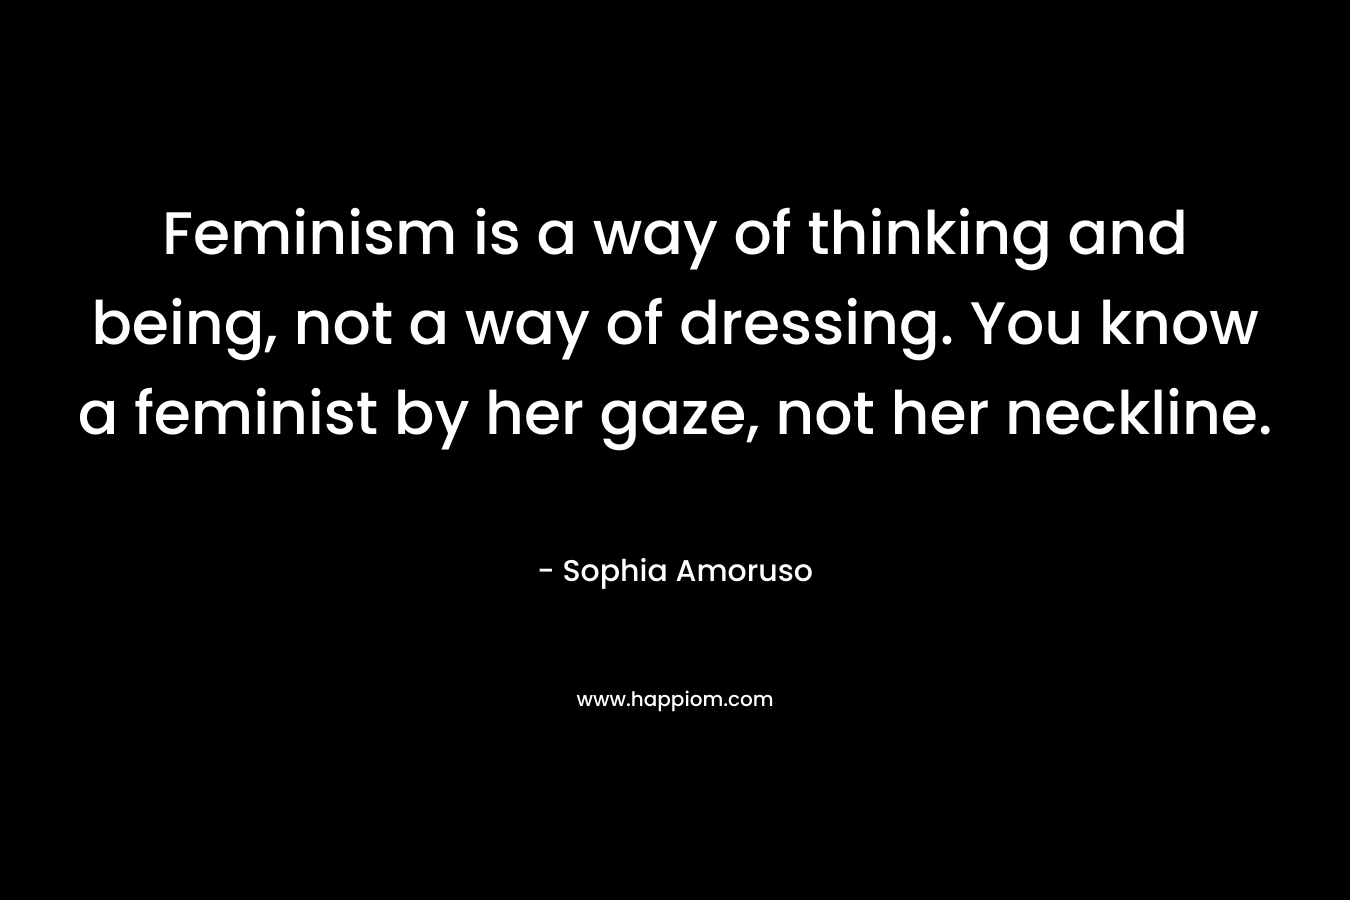 Feminism is a way of thinking and being, not a way of dressing. You know a feminist by her gaze, not her neckline.